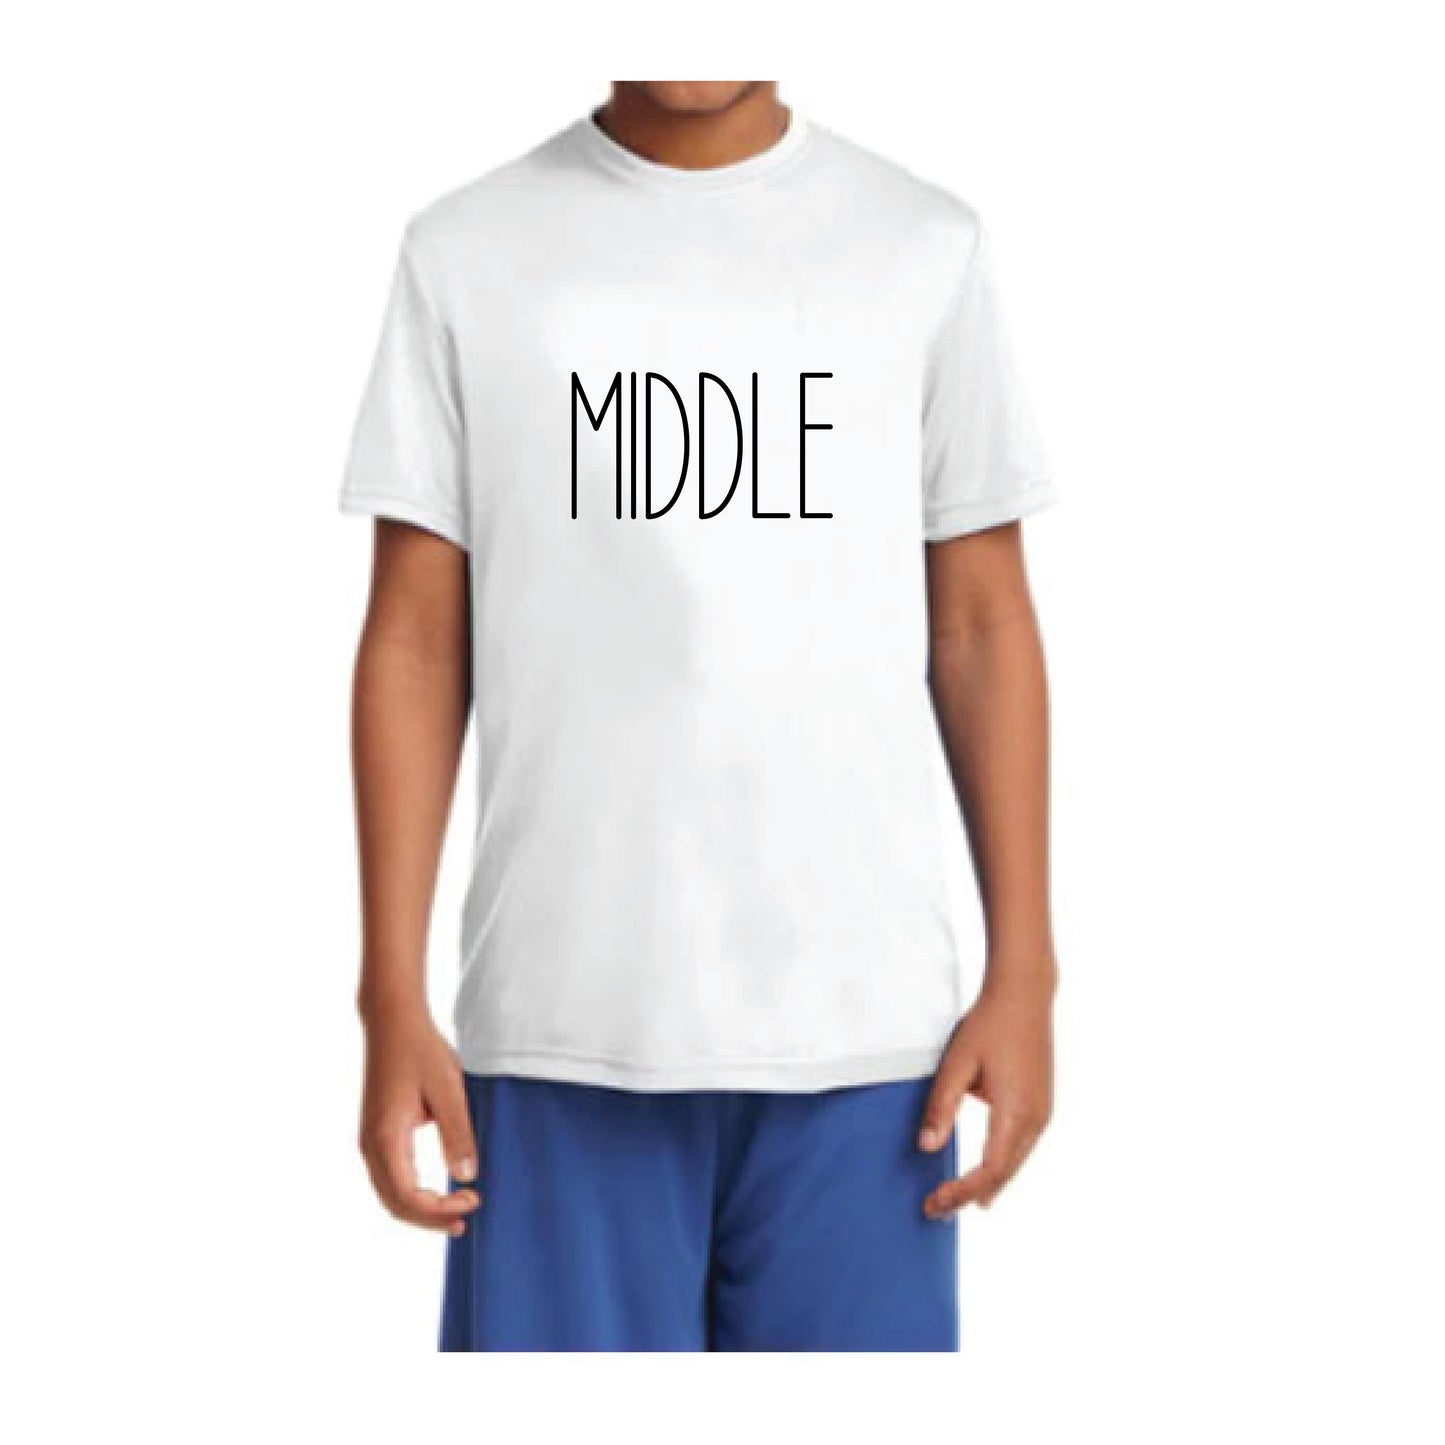 Siblings Kids Competitor T-Shirt - Middle